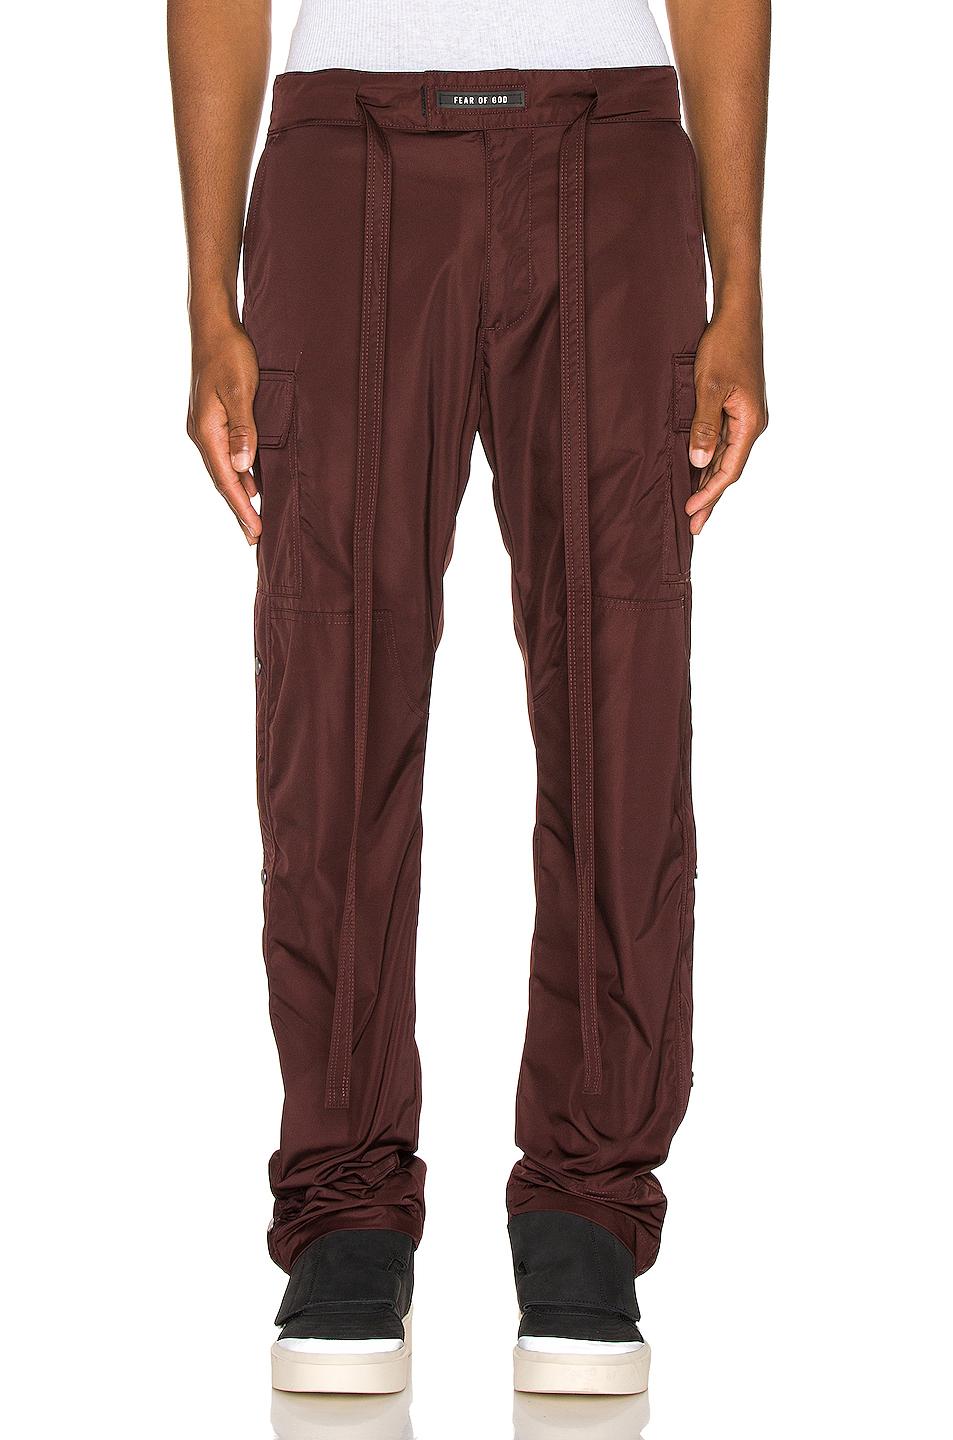 Fear Of God Synthetic Nylon Cargo Pant for Men - Lyst